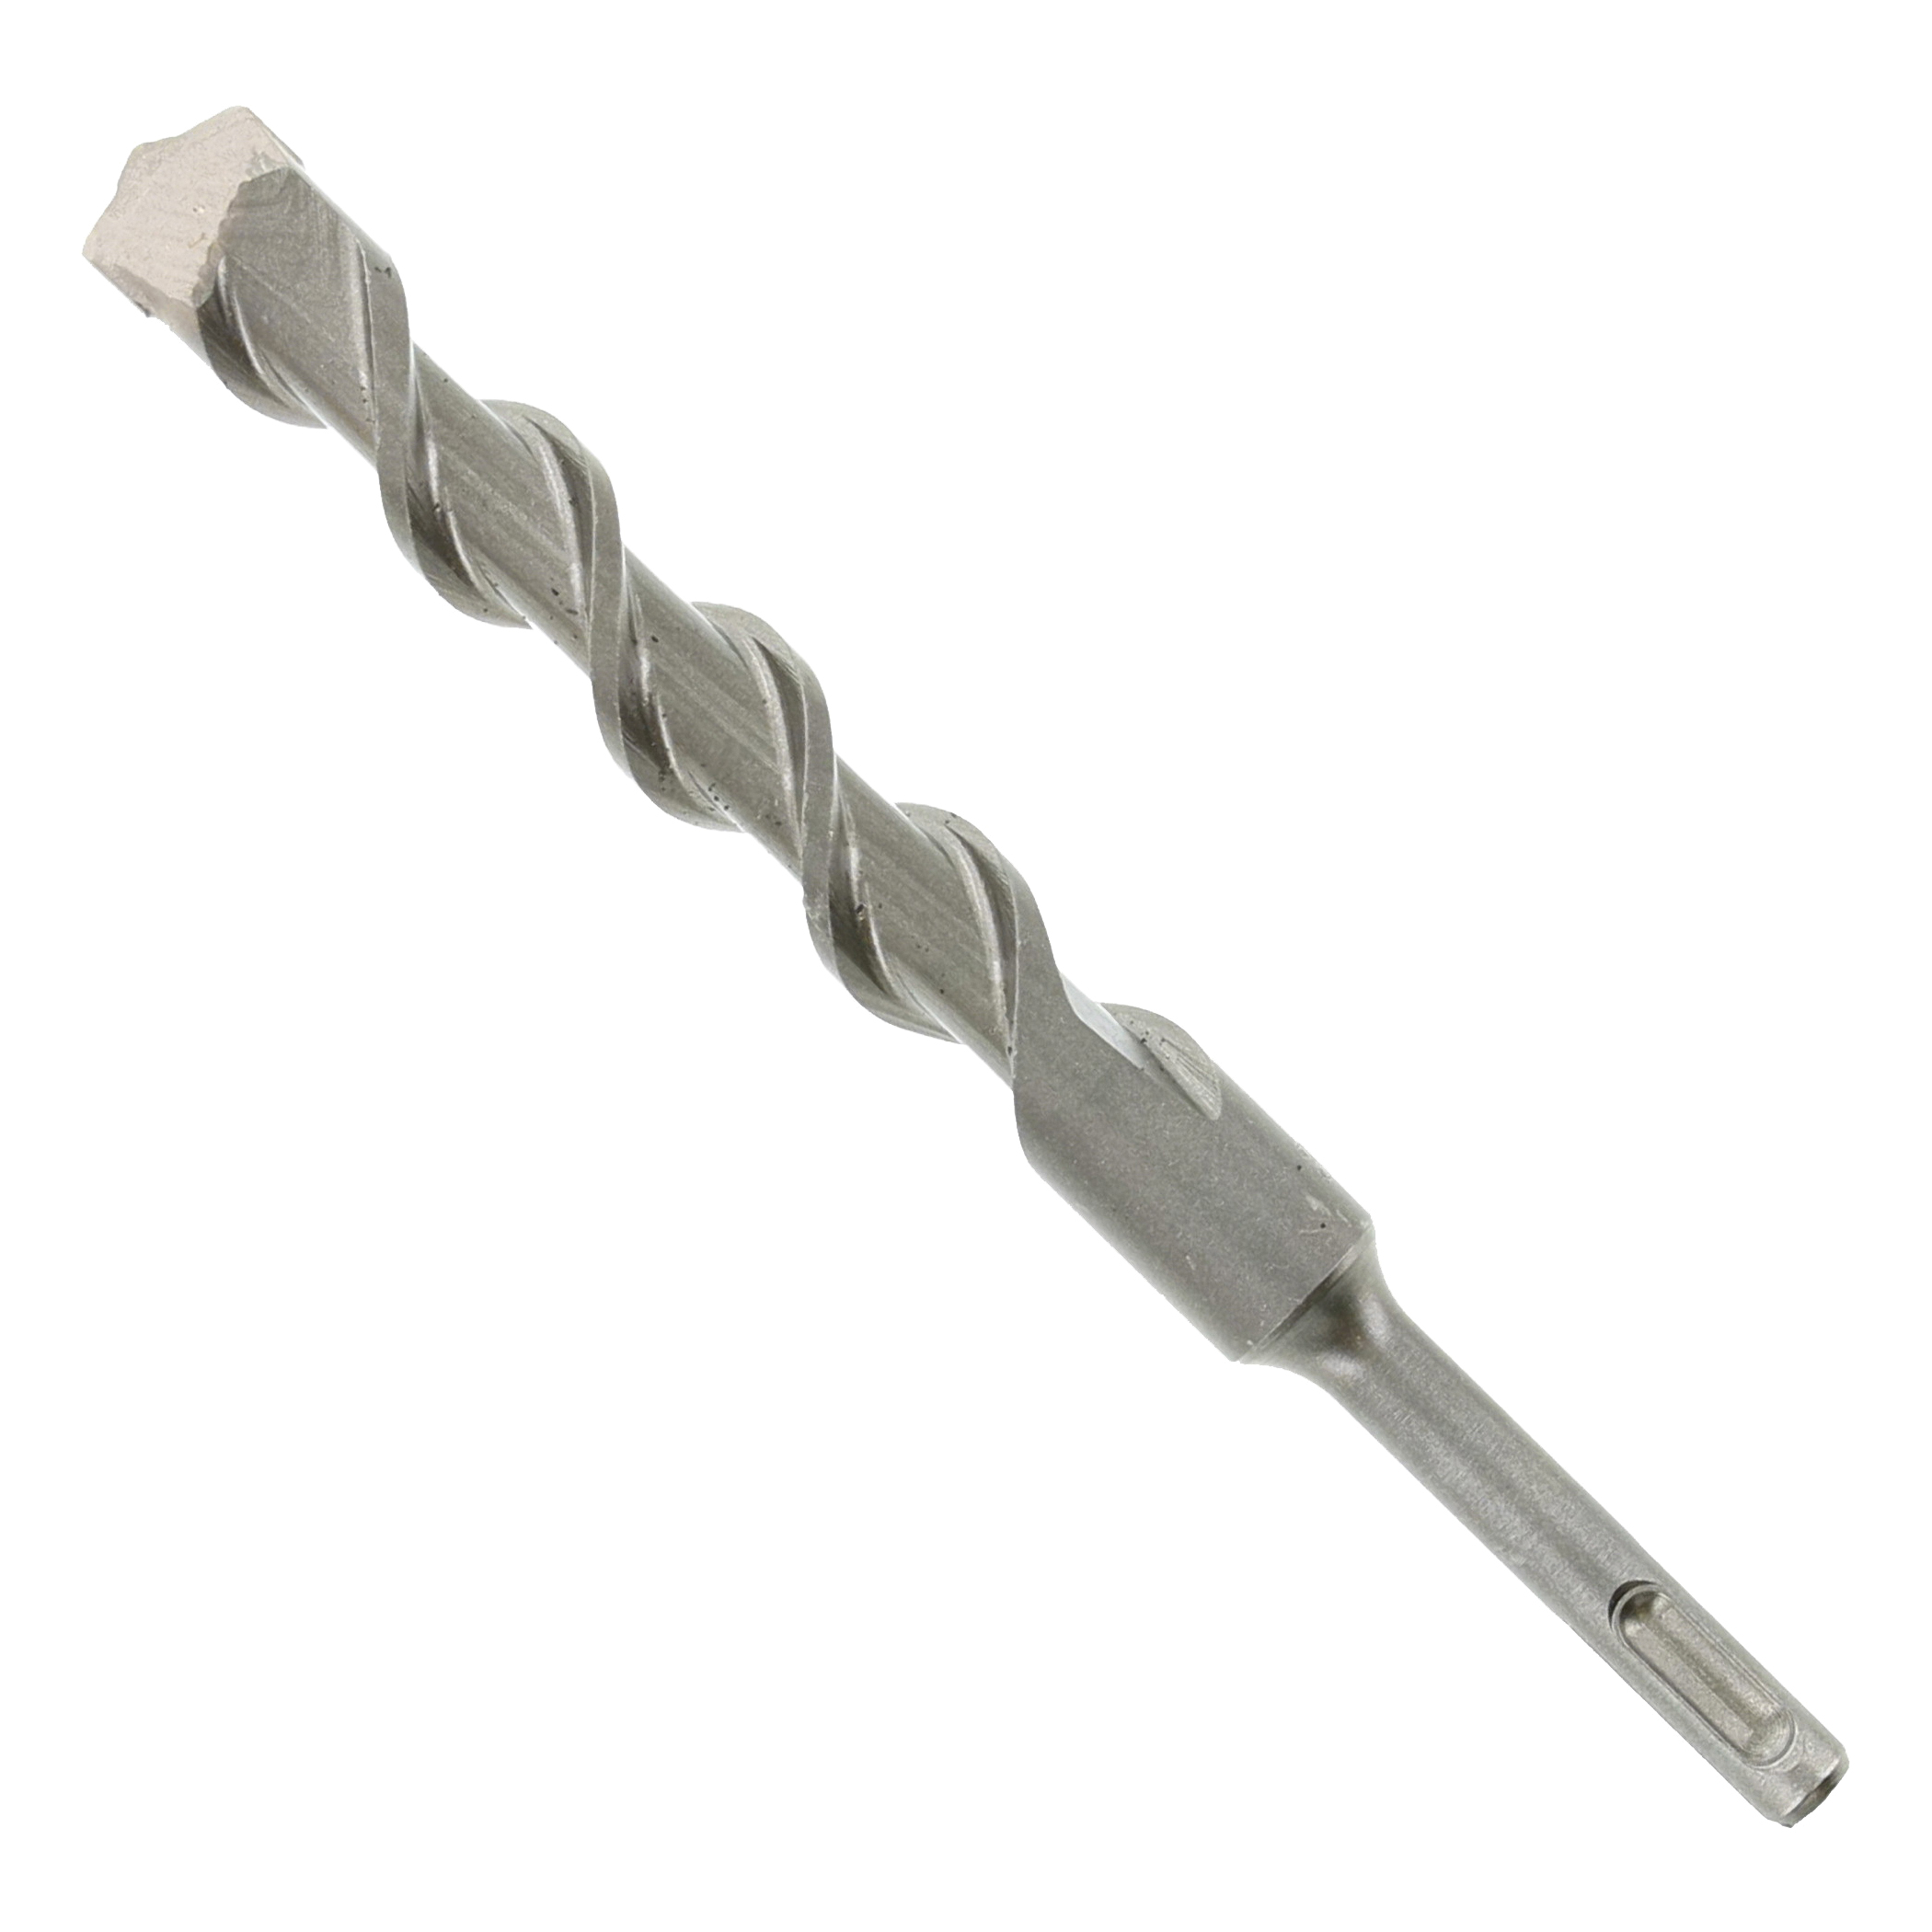 DMAPL2450 Hammer Drill Bit, 3/4 in Dia, 8 in OAL, Percussion, 4-Flute, SDS Plus Shank